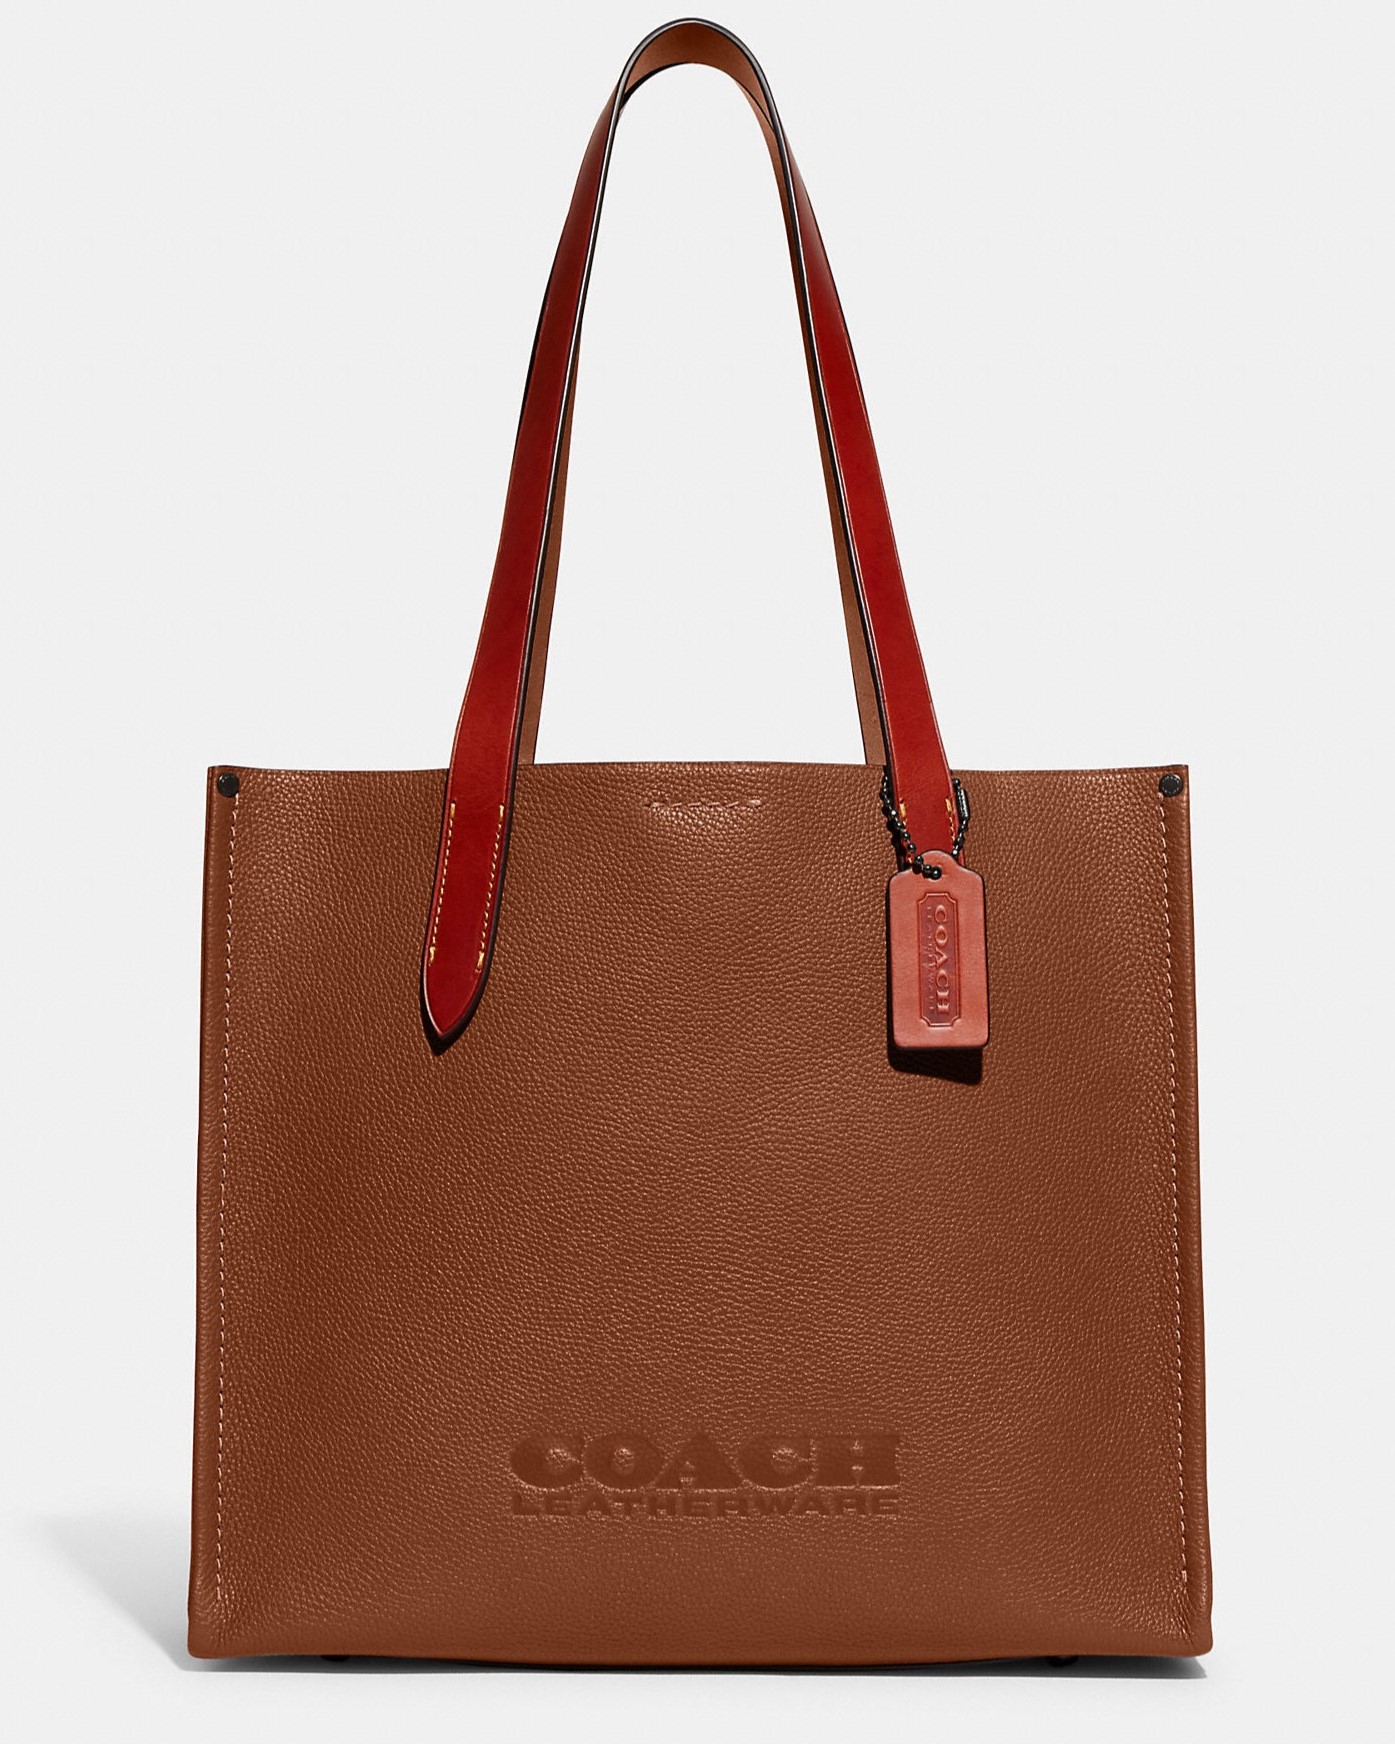 TÚI TOTE COACH RELAY TOTE 34 POLISHED PEBBLE LEATHER BAG CH757 6